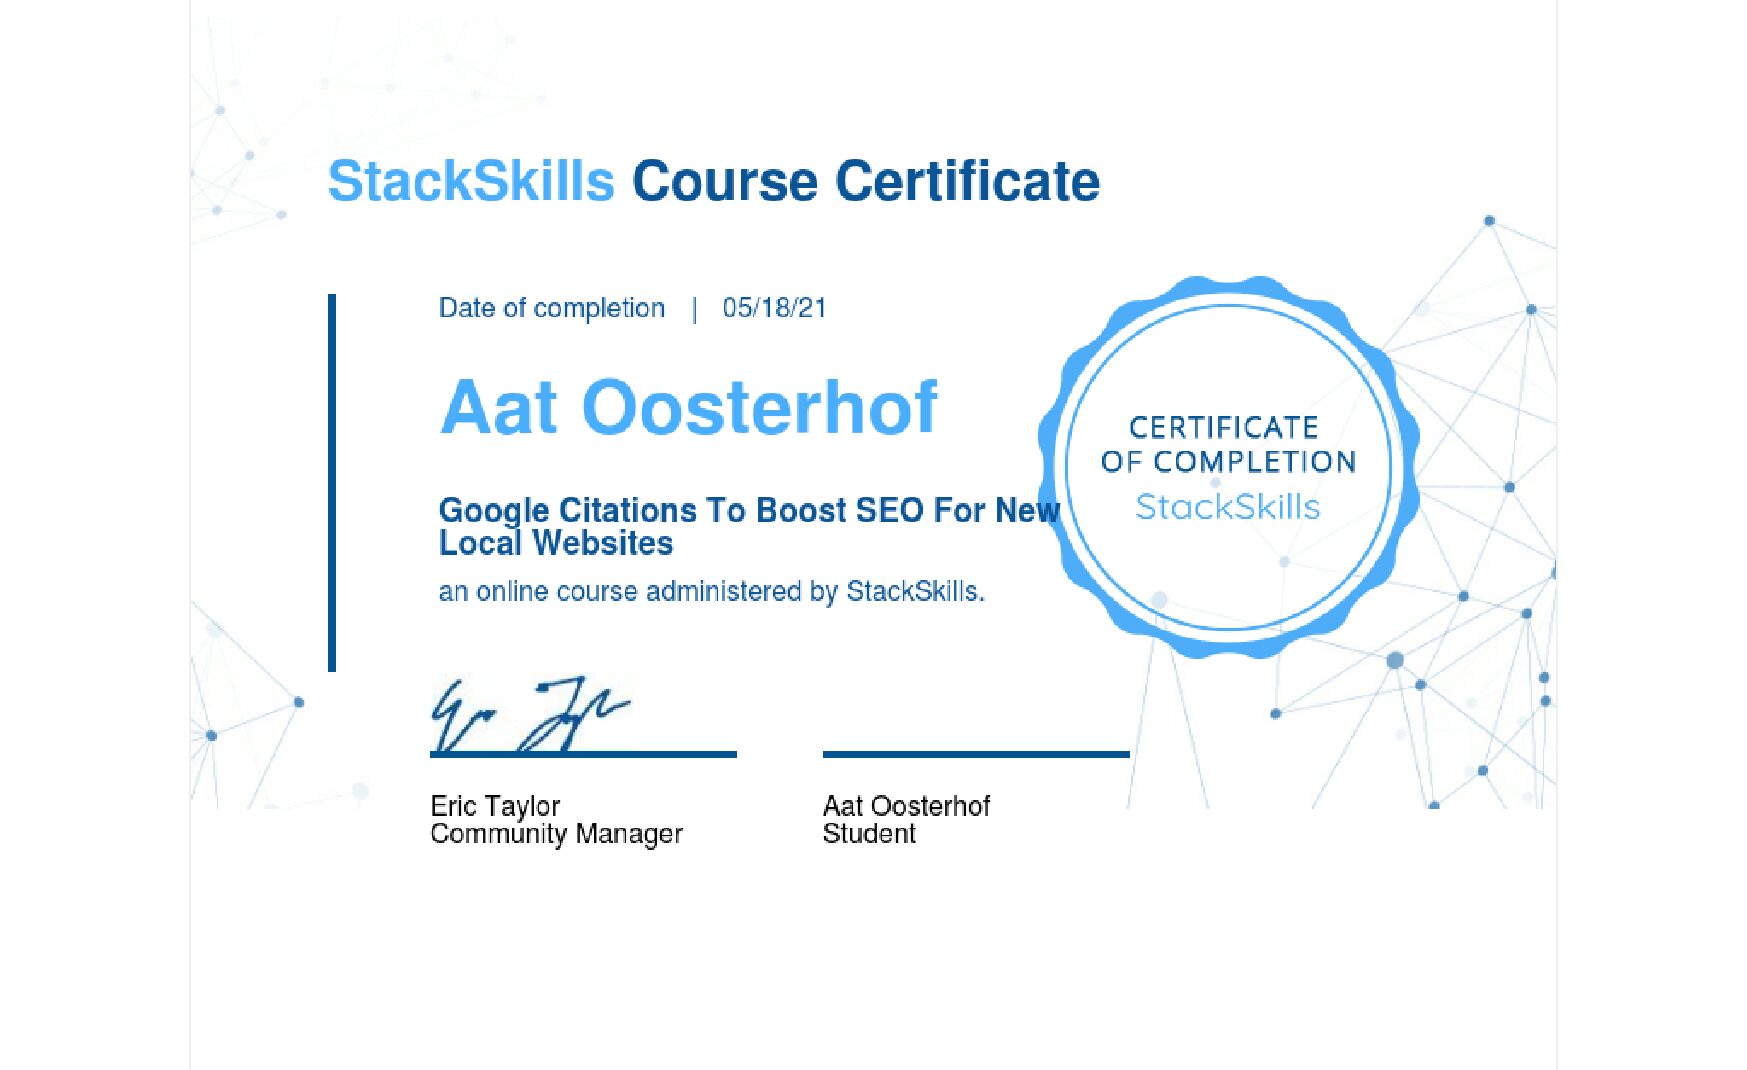 The Ultimate Guide To Google AdWords an online course administered by StackSkills.